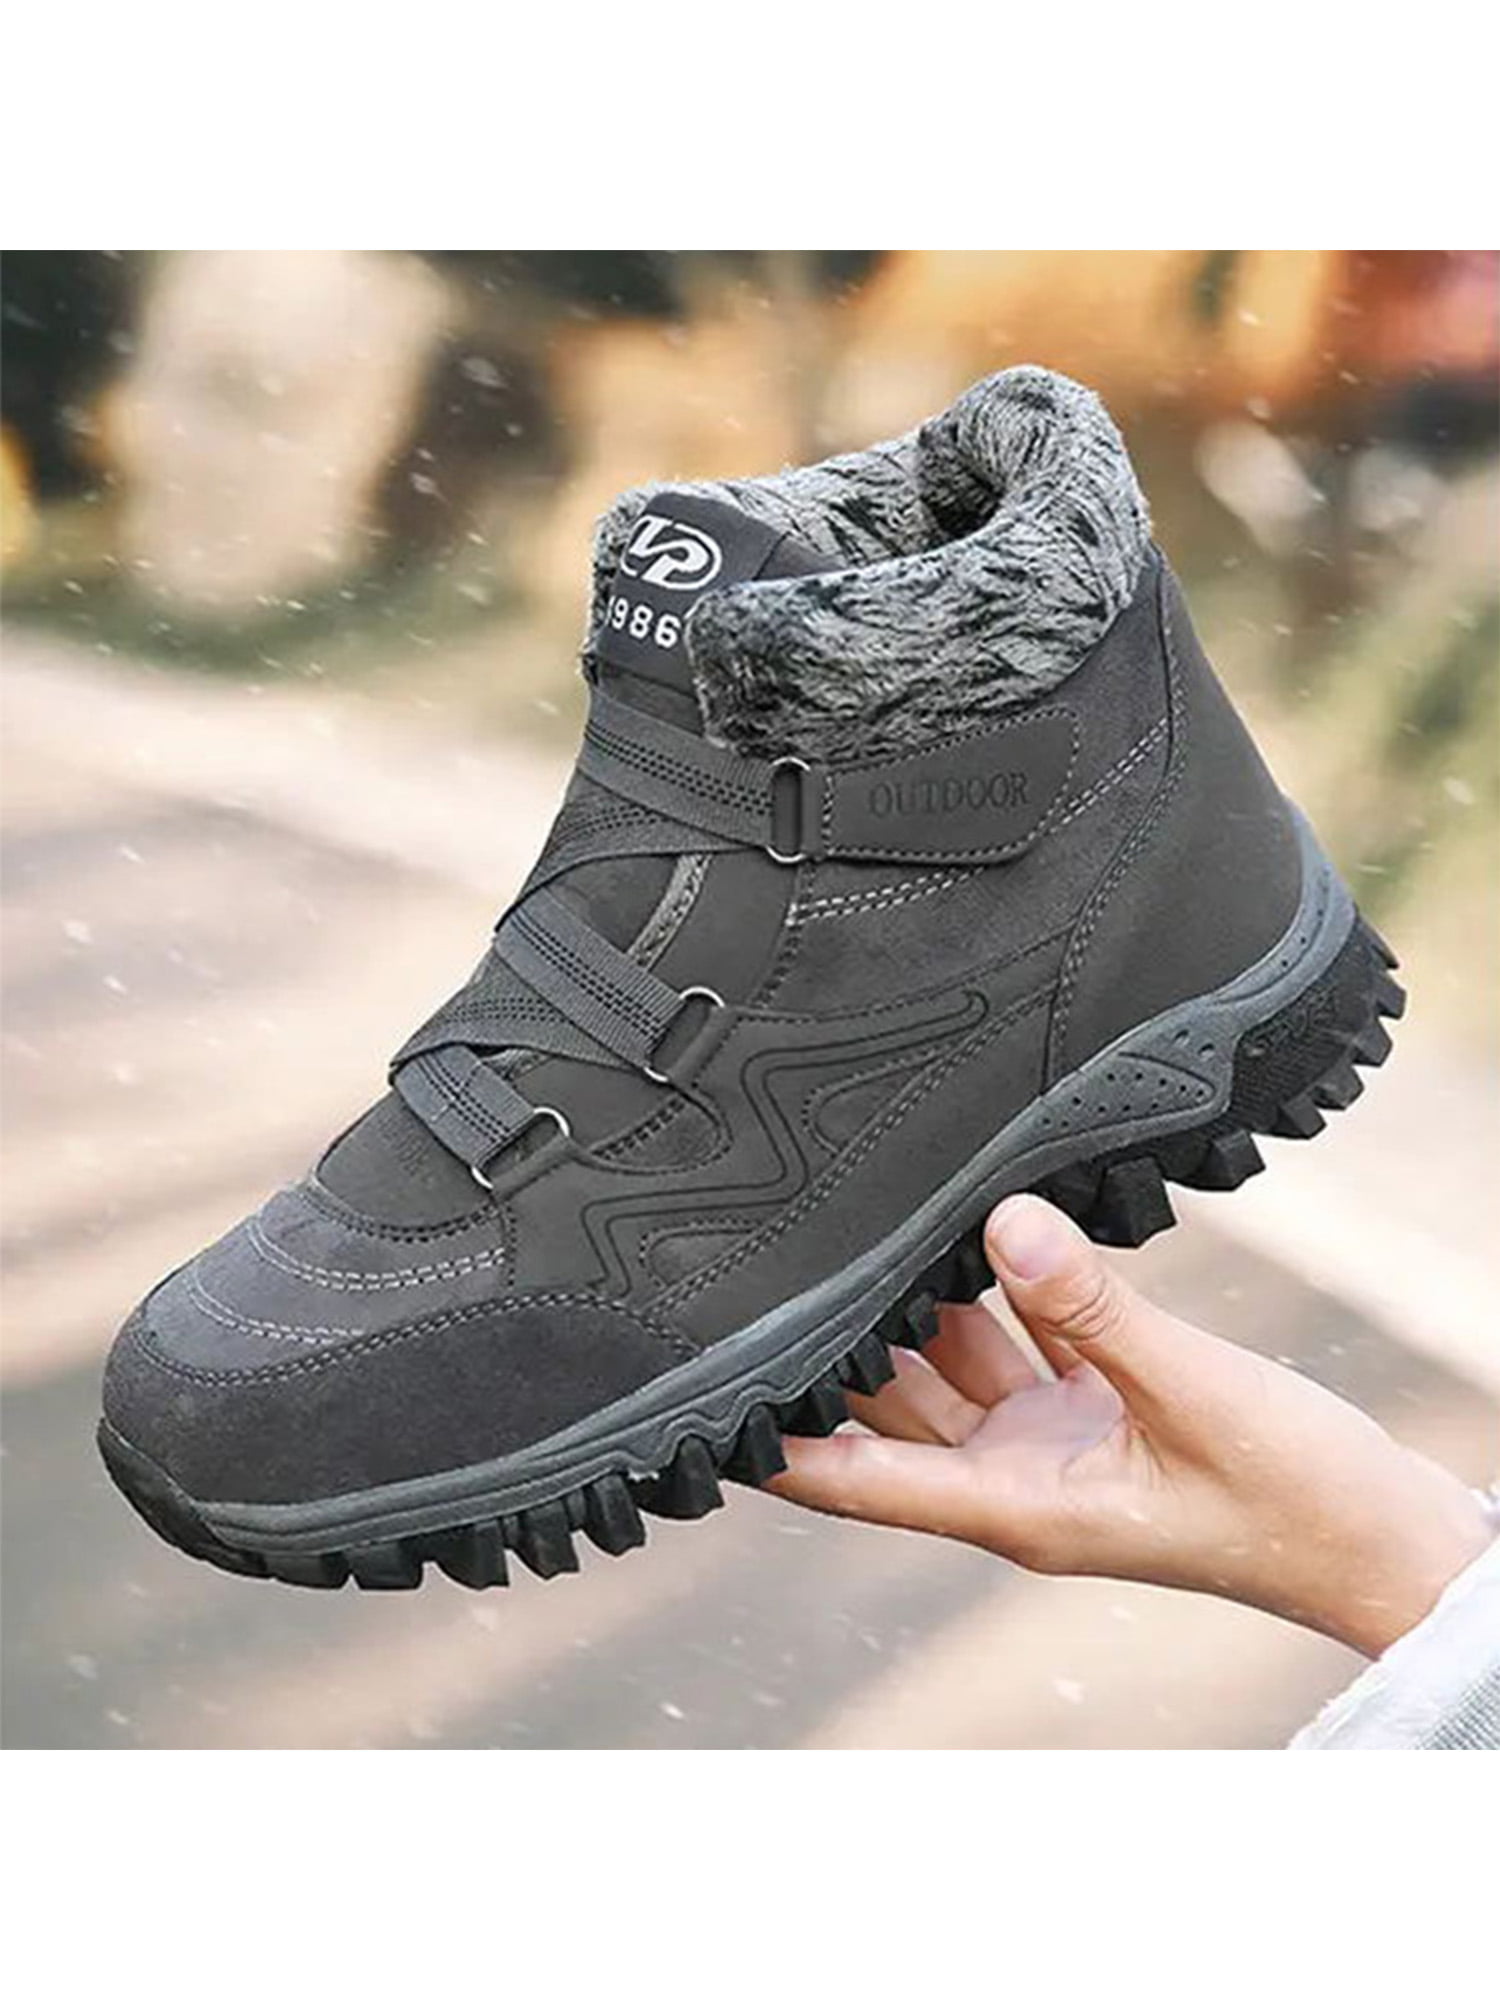 Mens Snow Boots Fur Lined Booties Non-Slip Outdoor Hiking Winter Shoes Working Walking Ankle Sneaker